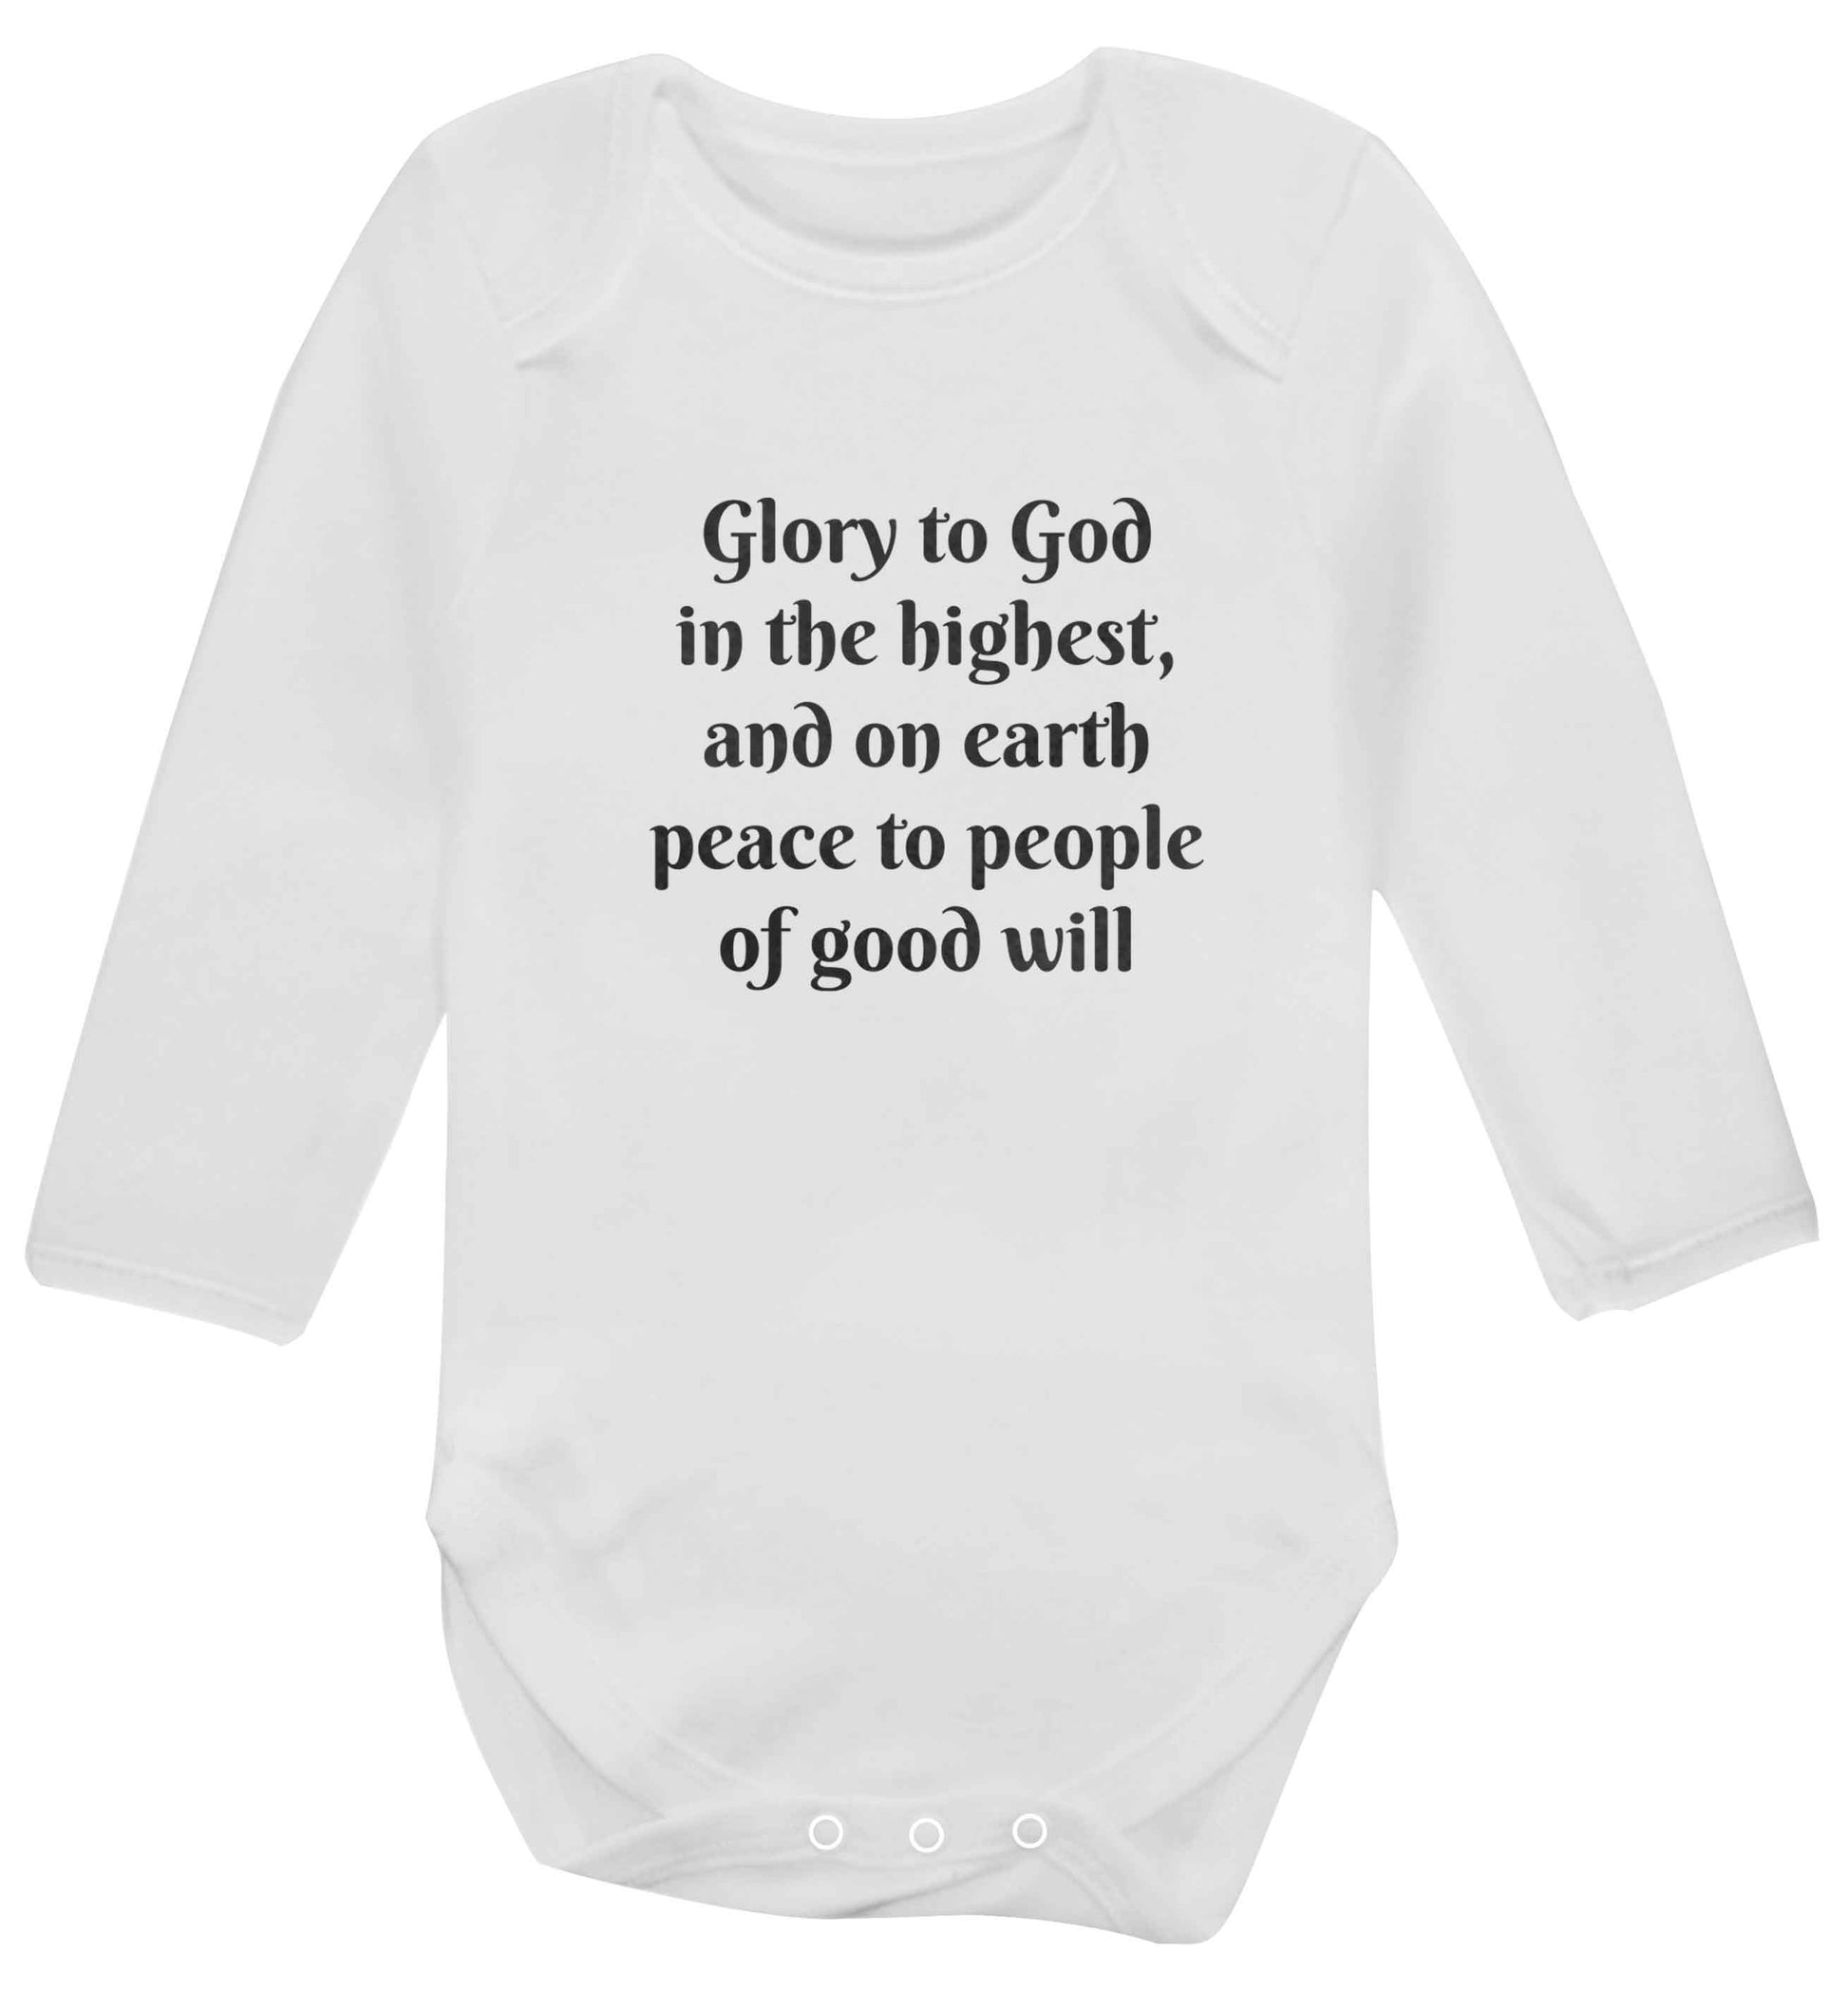 Glory to God in the highest, and on earth peace to people of good will baby vest long sleeved white 6-12 months